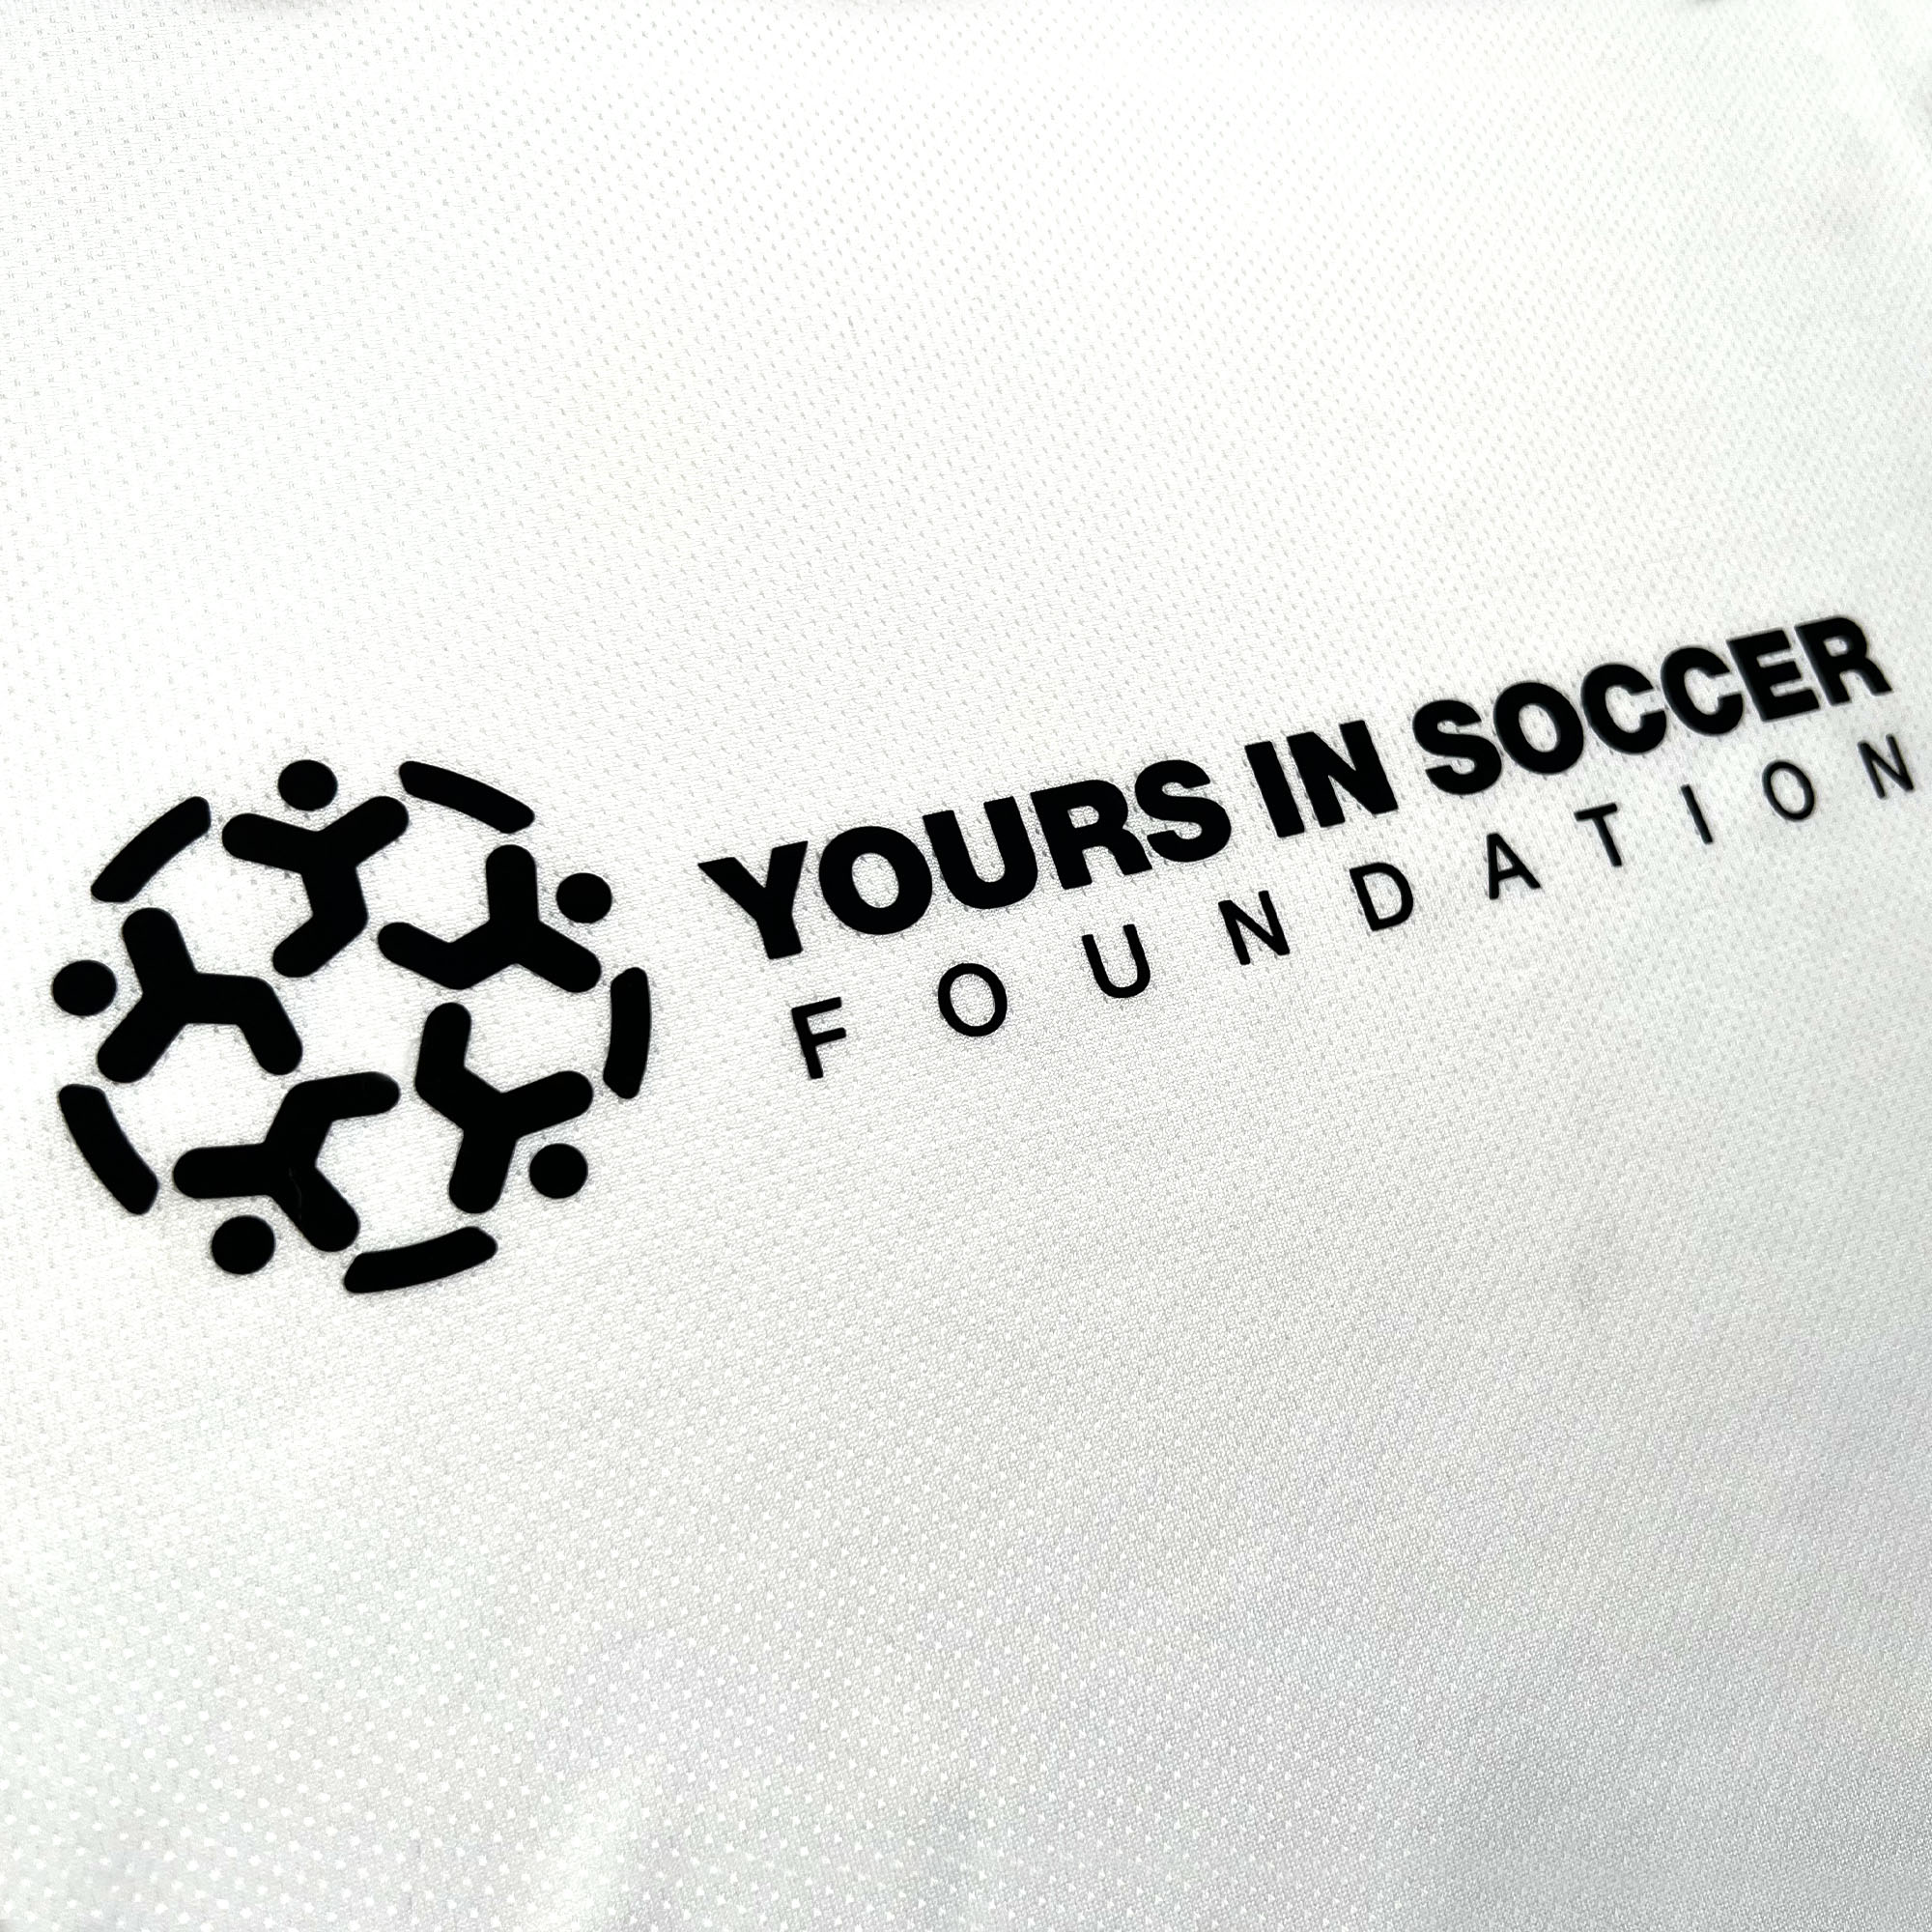 Close-up of Yours in Soccer Foundation logo on white soccer jersey.